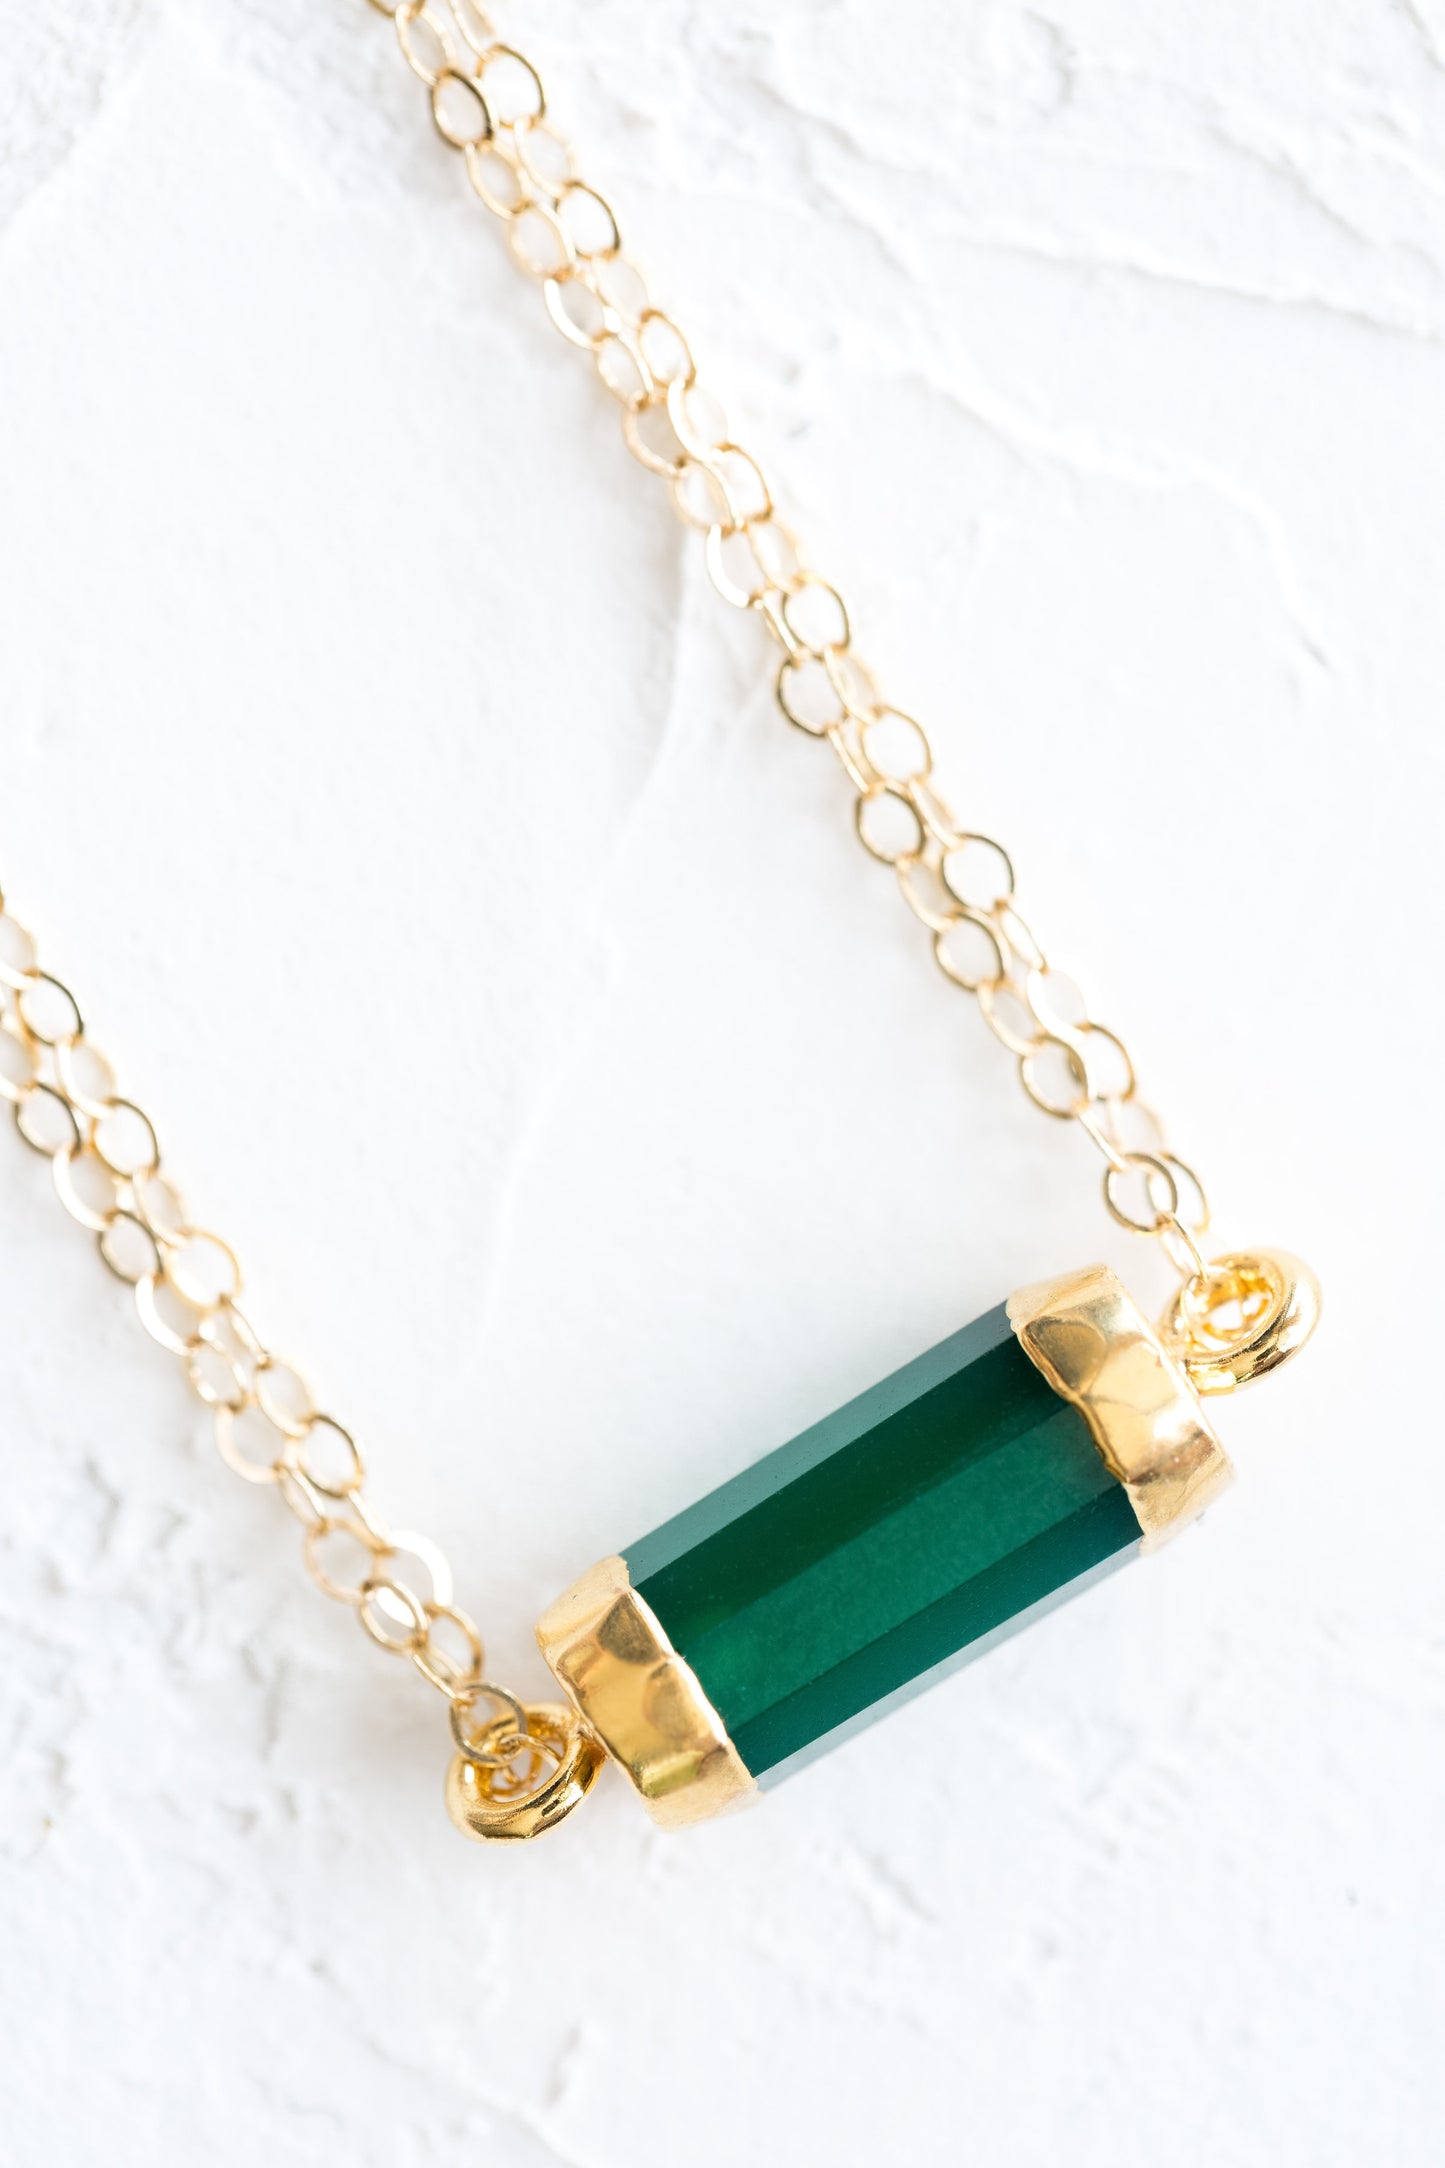 Gemstone Layering Stack Necklace | MEND Jewelry – Mend Jewelry